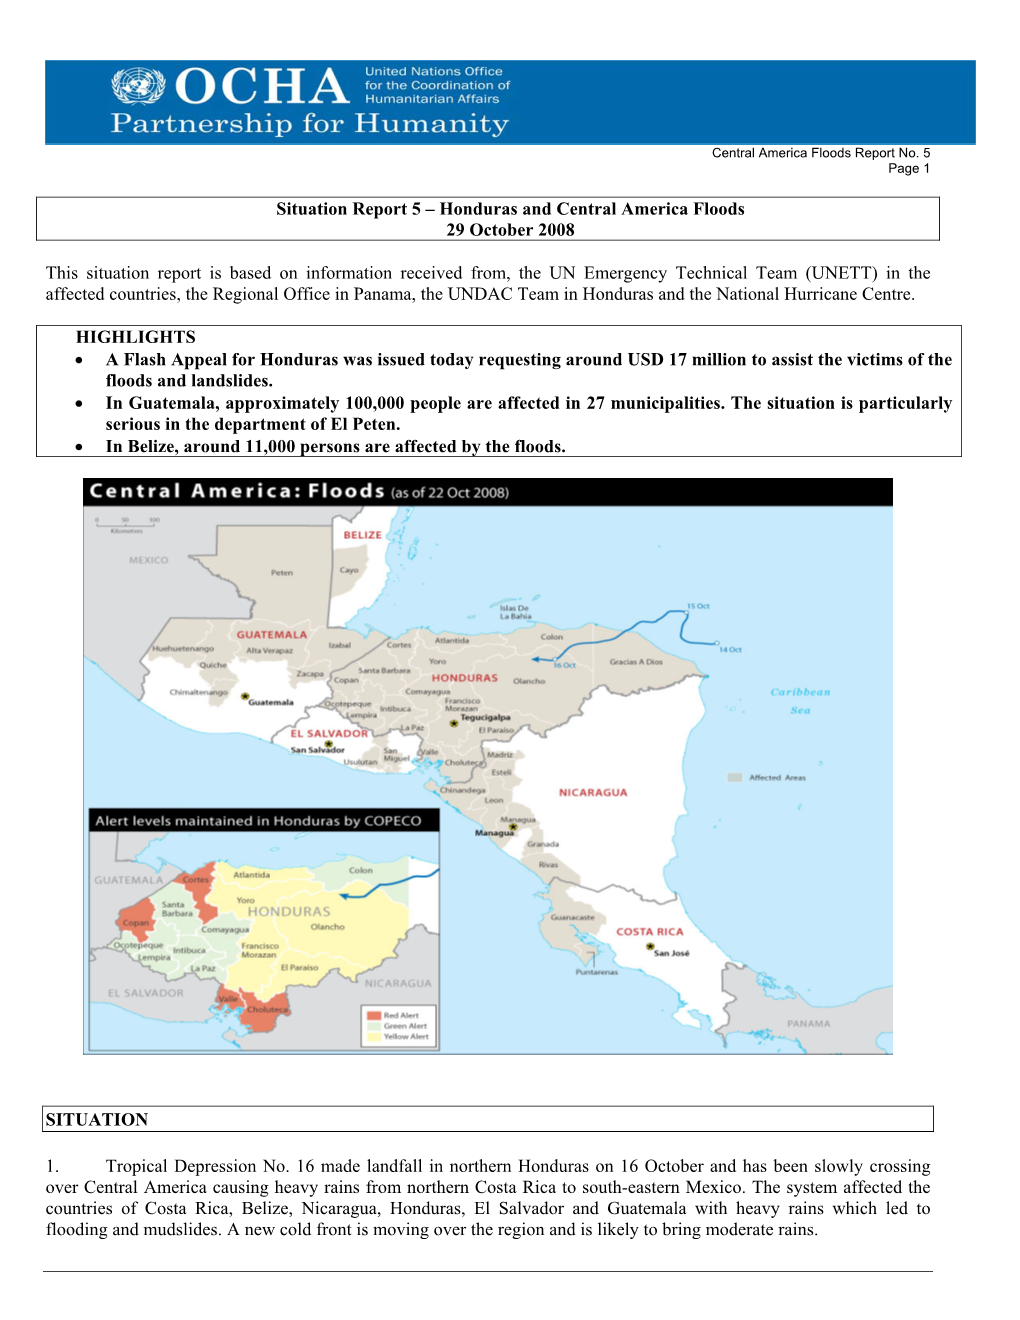 Situation Report 5 – Honduras and Central America Floods 29 October 2008